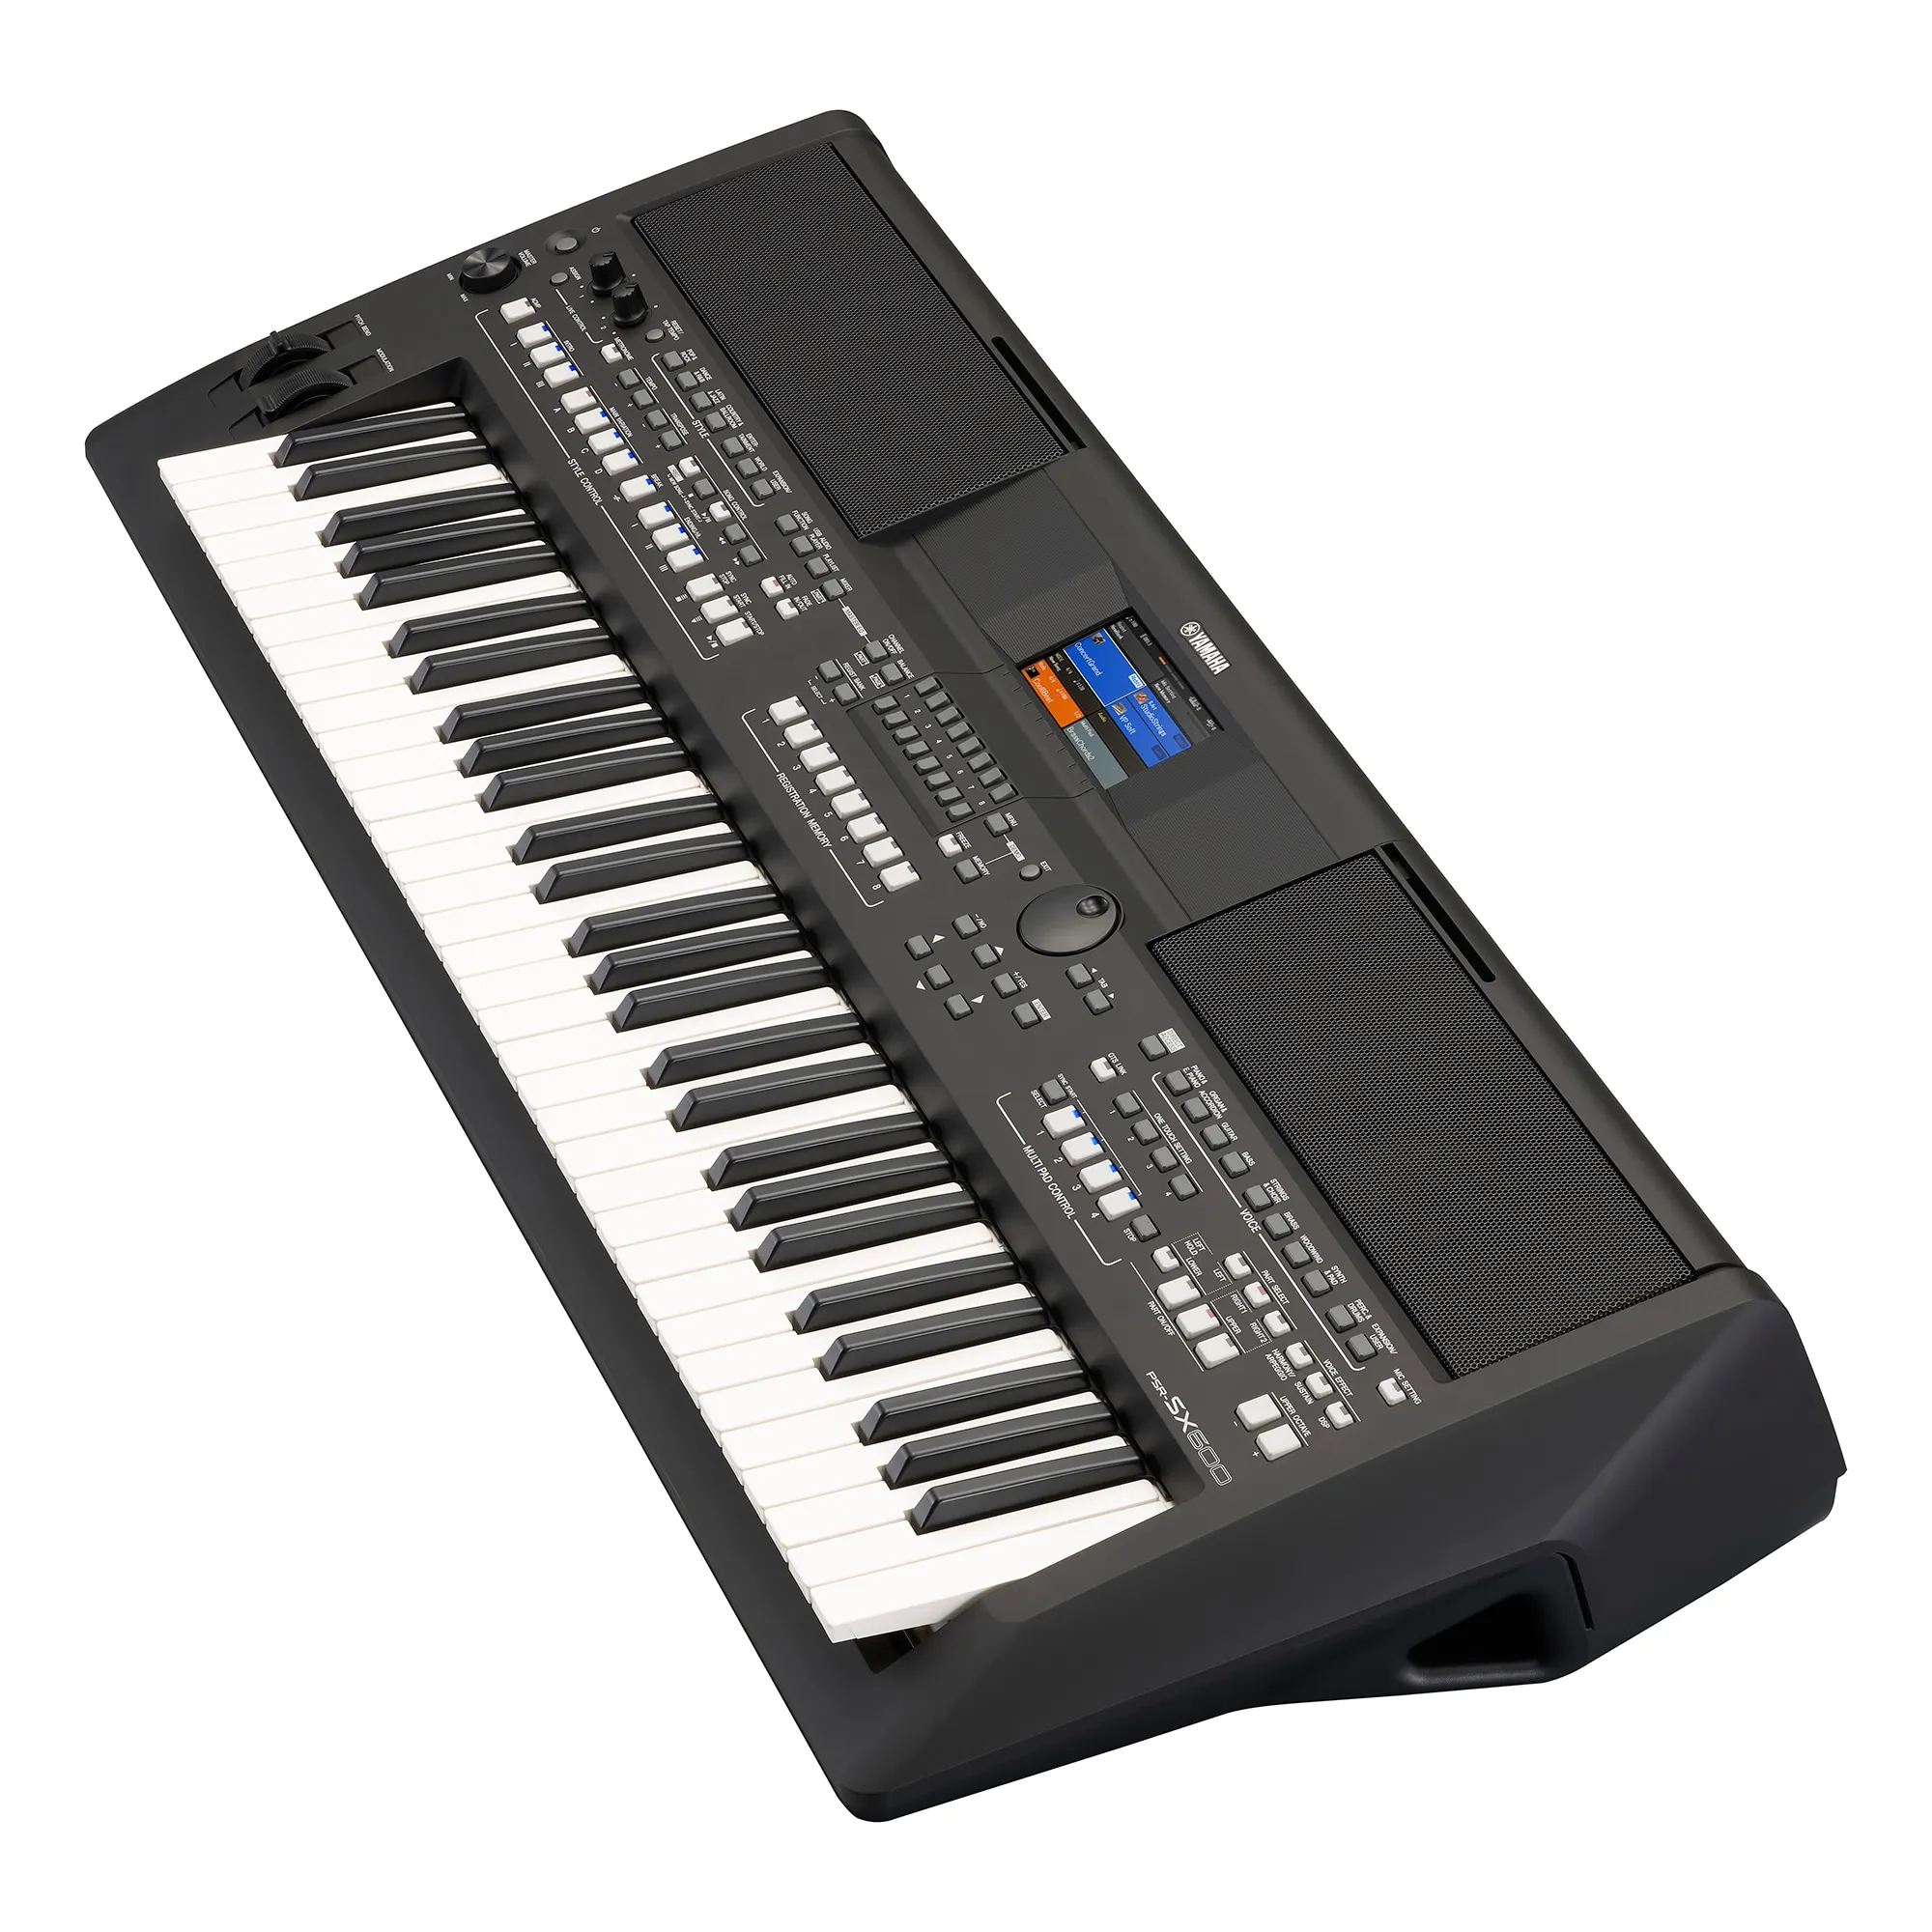 

SUMMER SALES DISCOUNT ON 100% NEW 2022 ORIGINAL YamahaS PSR SX900 S975 SX700 S970 Keyboard Set Deluxe keyboards Ready to ship